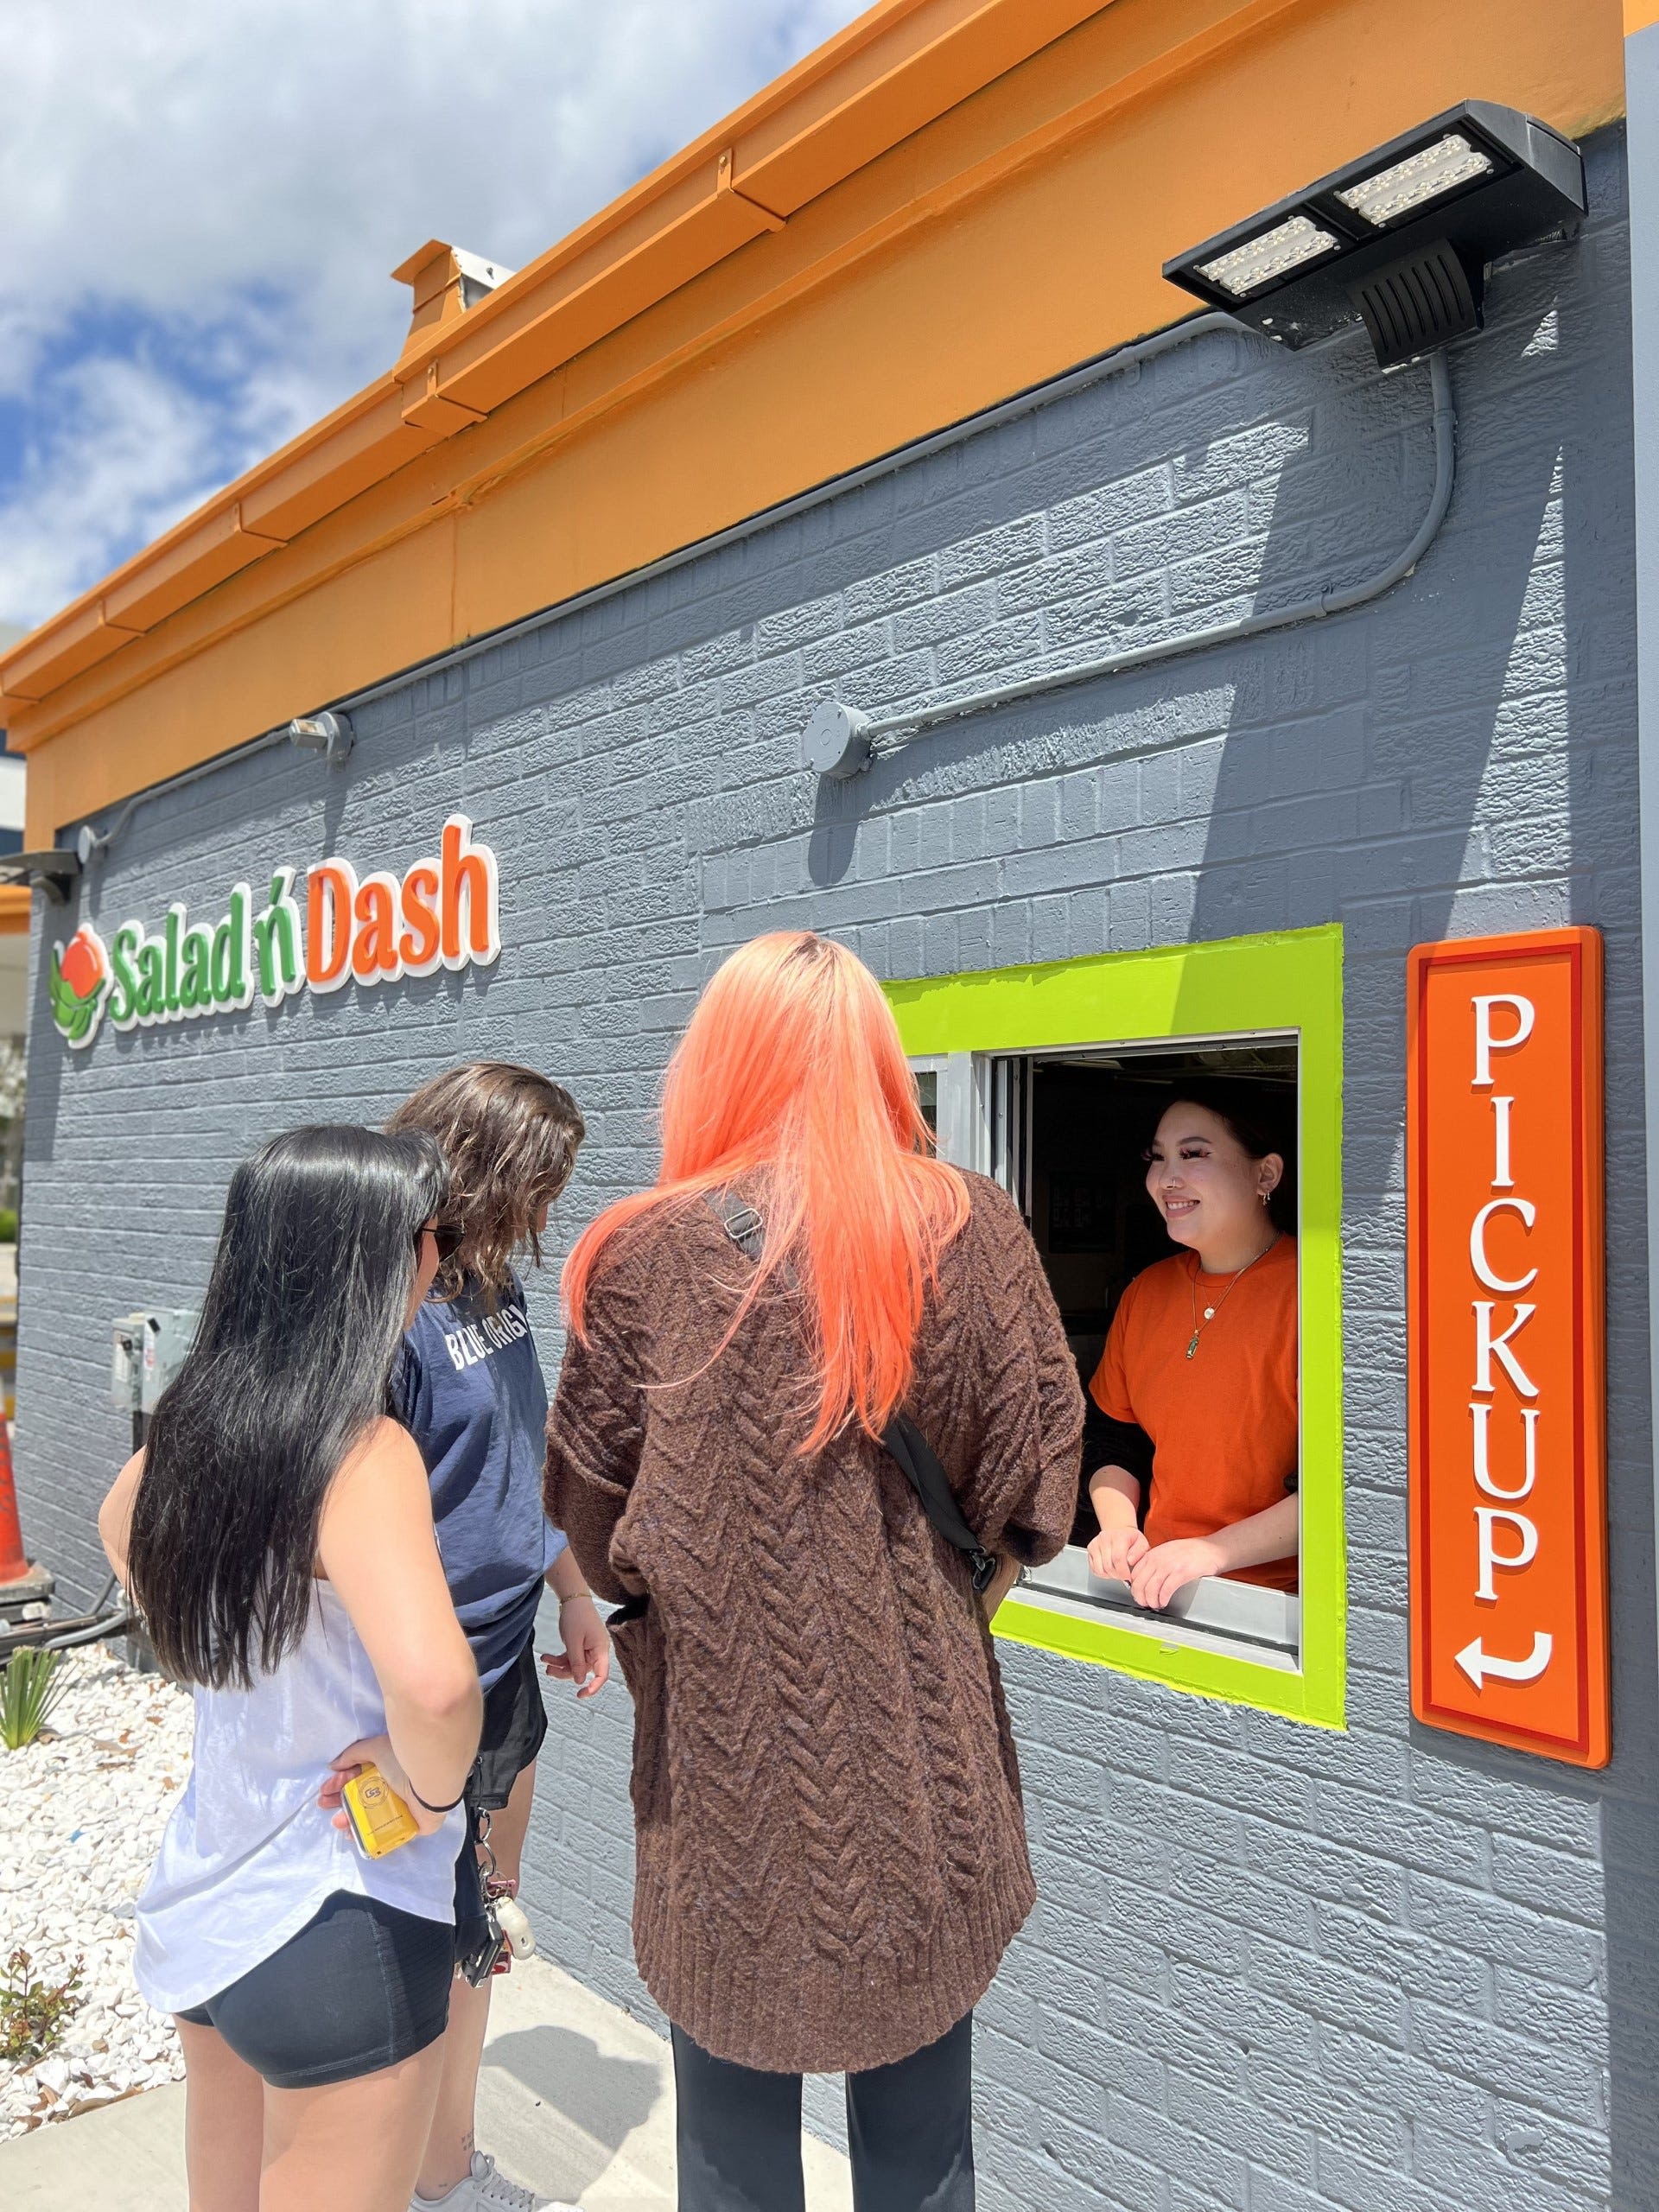 Downtown Pensacola's salad and cocktail combo drive-thru is now open. Here's what to try